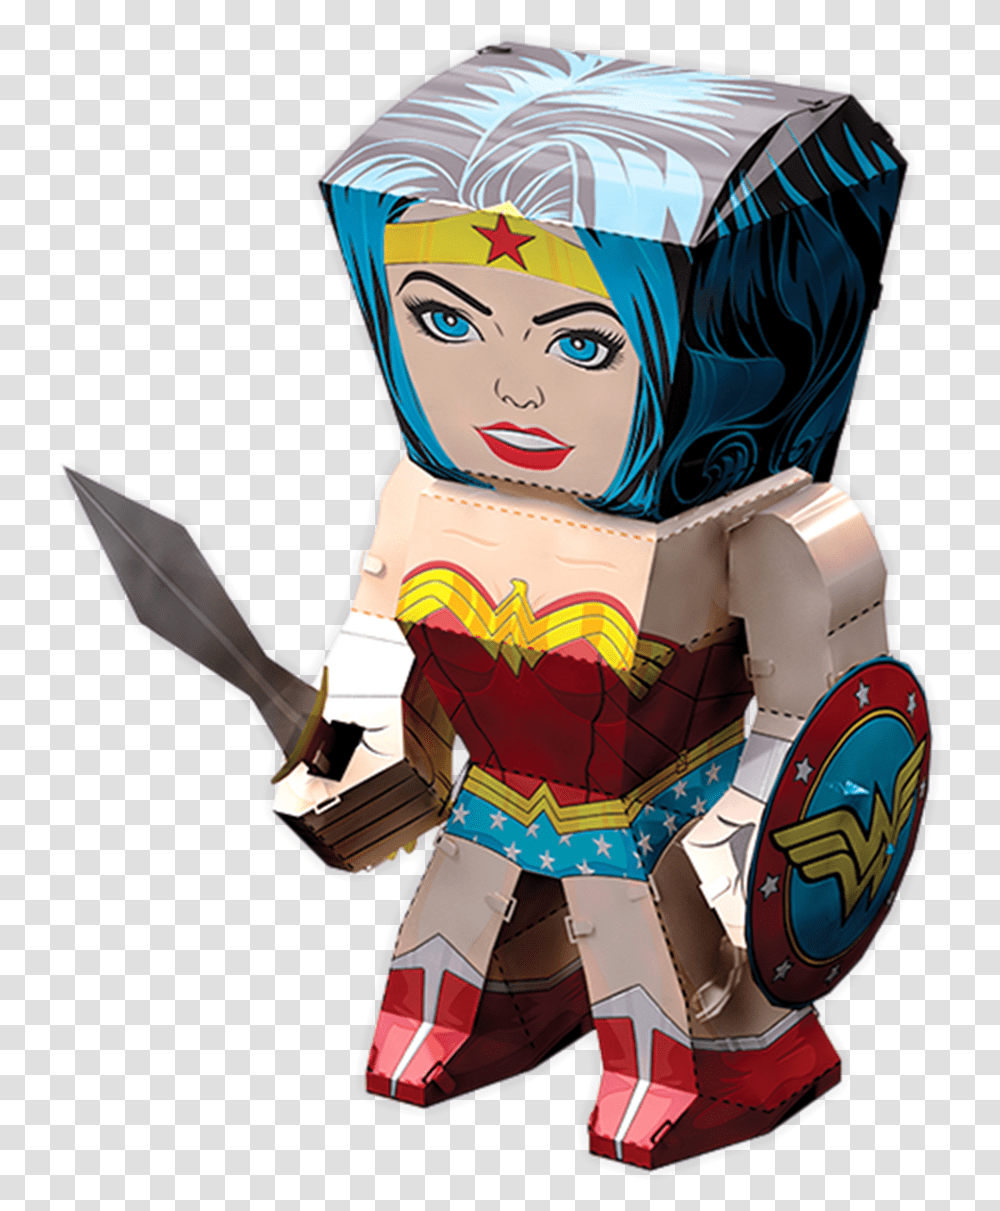 Picture Of Wonder Woman Wonder Woman, Samurai, Toy, Knight, Book Transparent Png